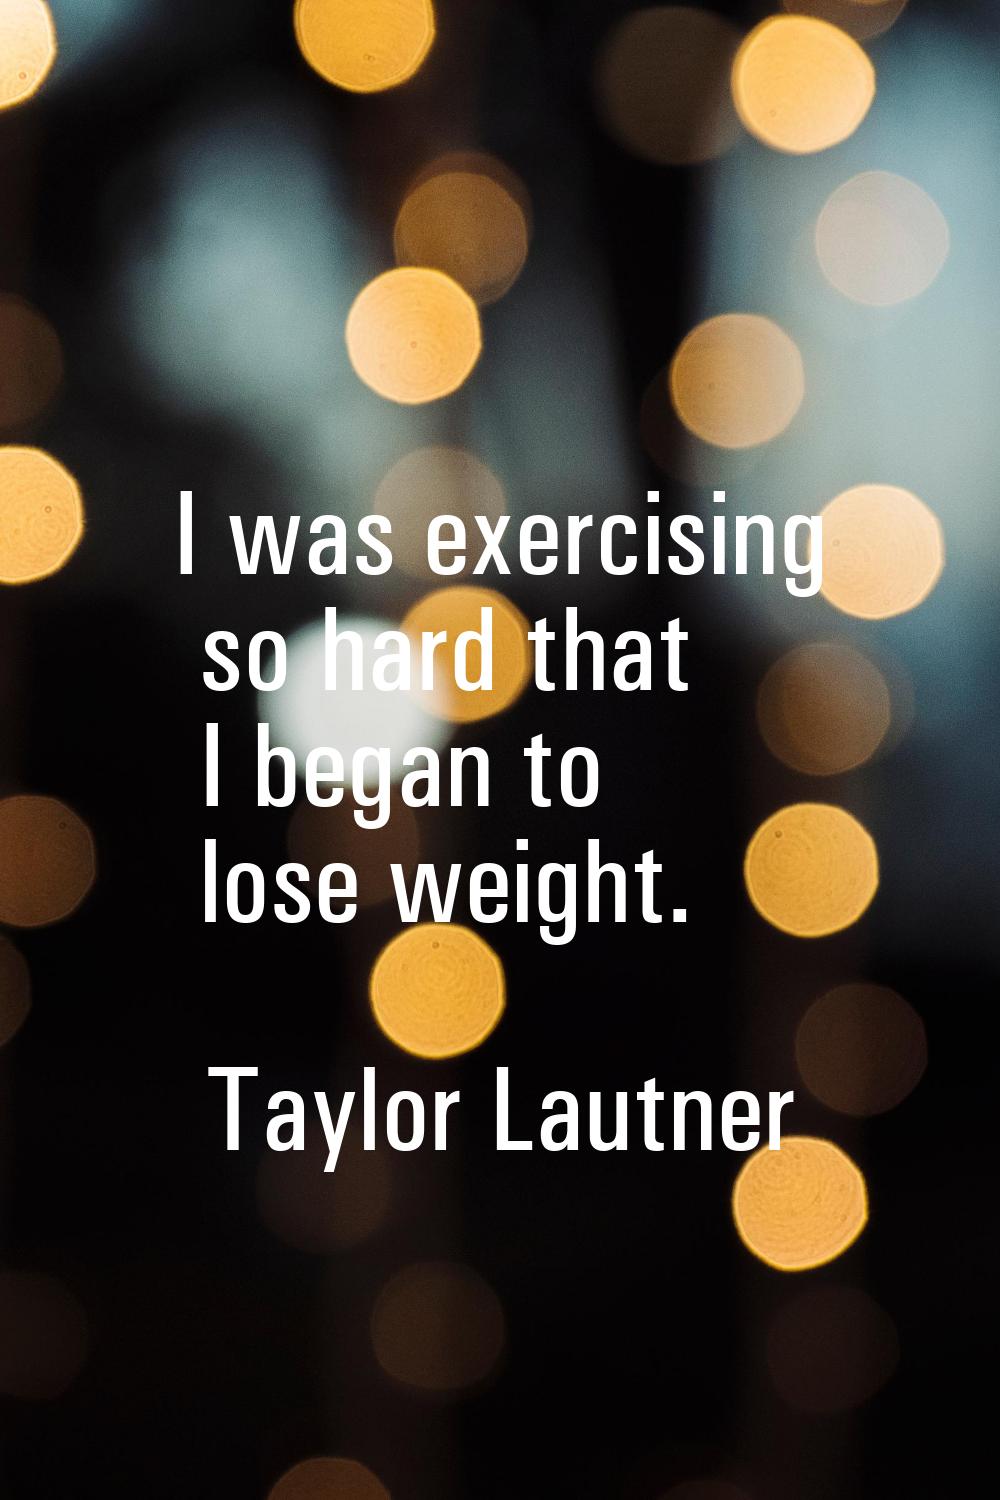 I was exercising so hard that I began to lose weight.